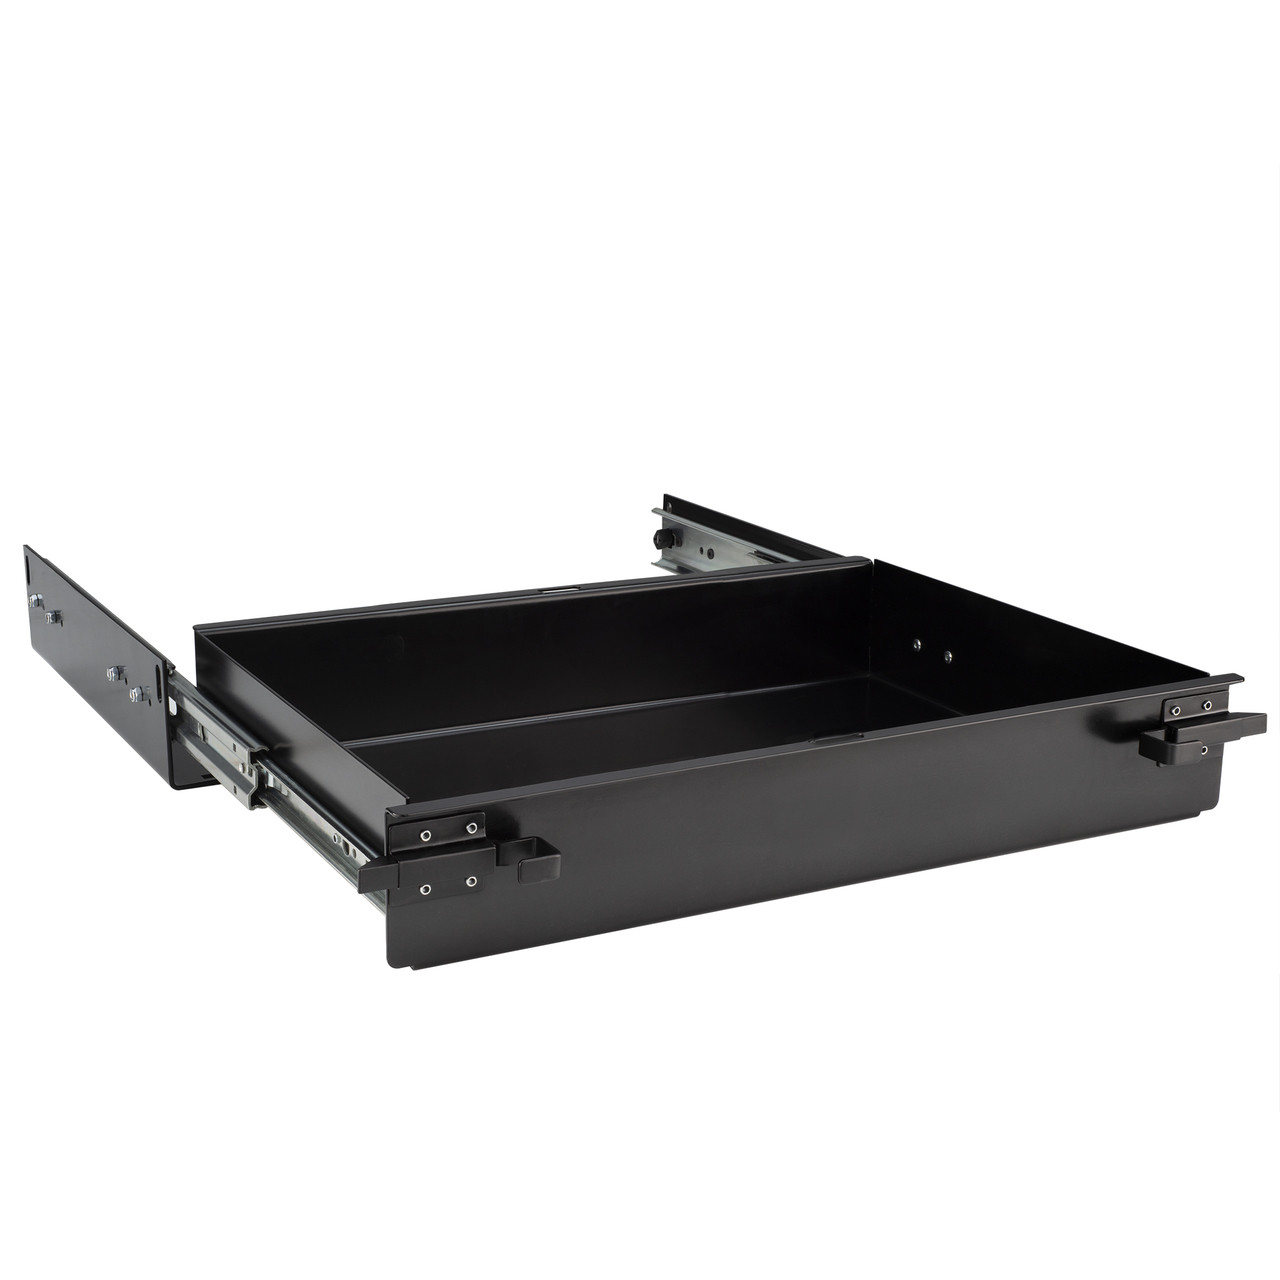 RV Generator Slide Out Tray Can be Used for Yamaha 2000 Generators - RecPro